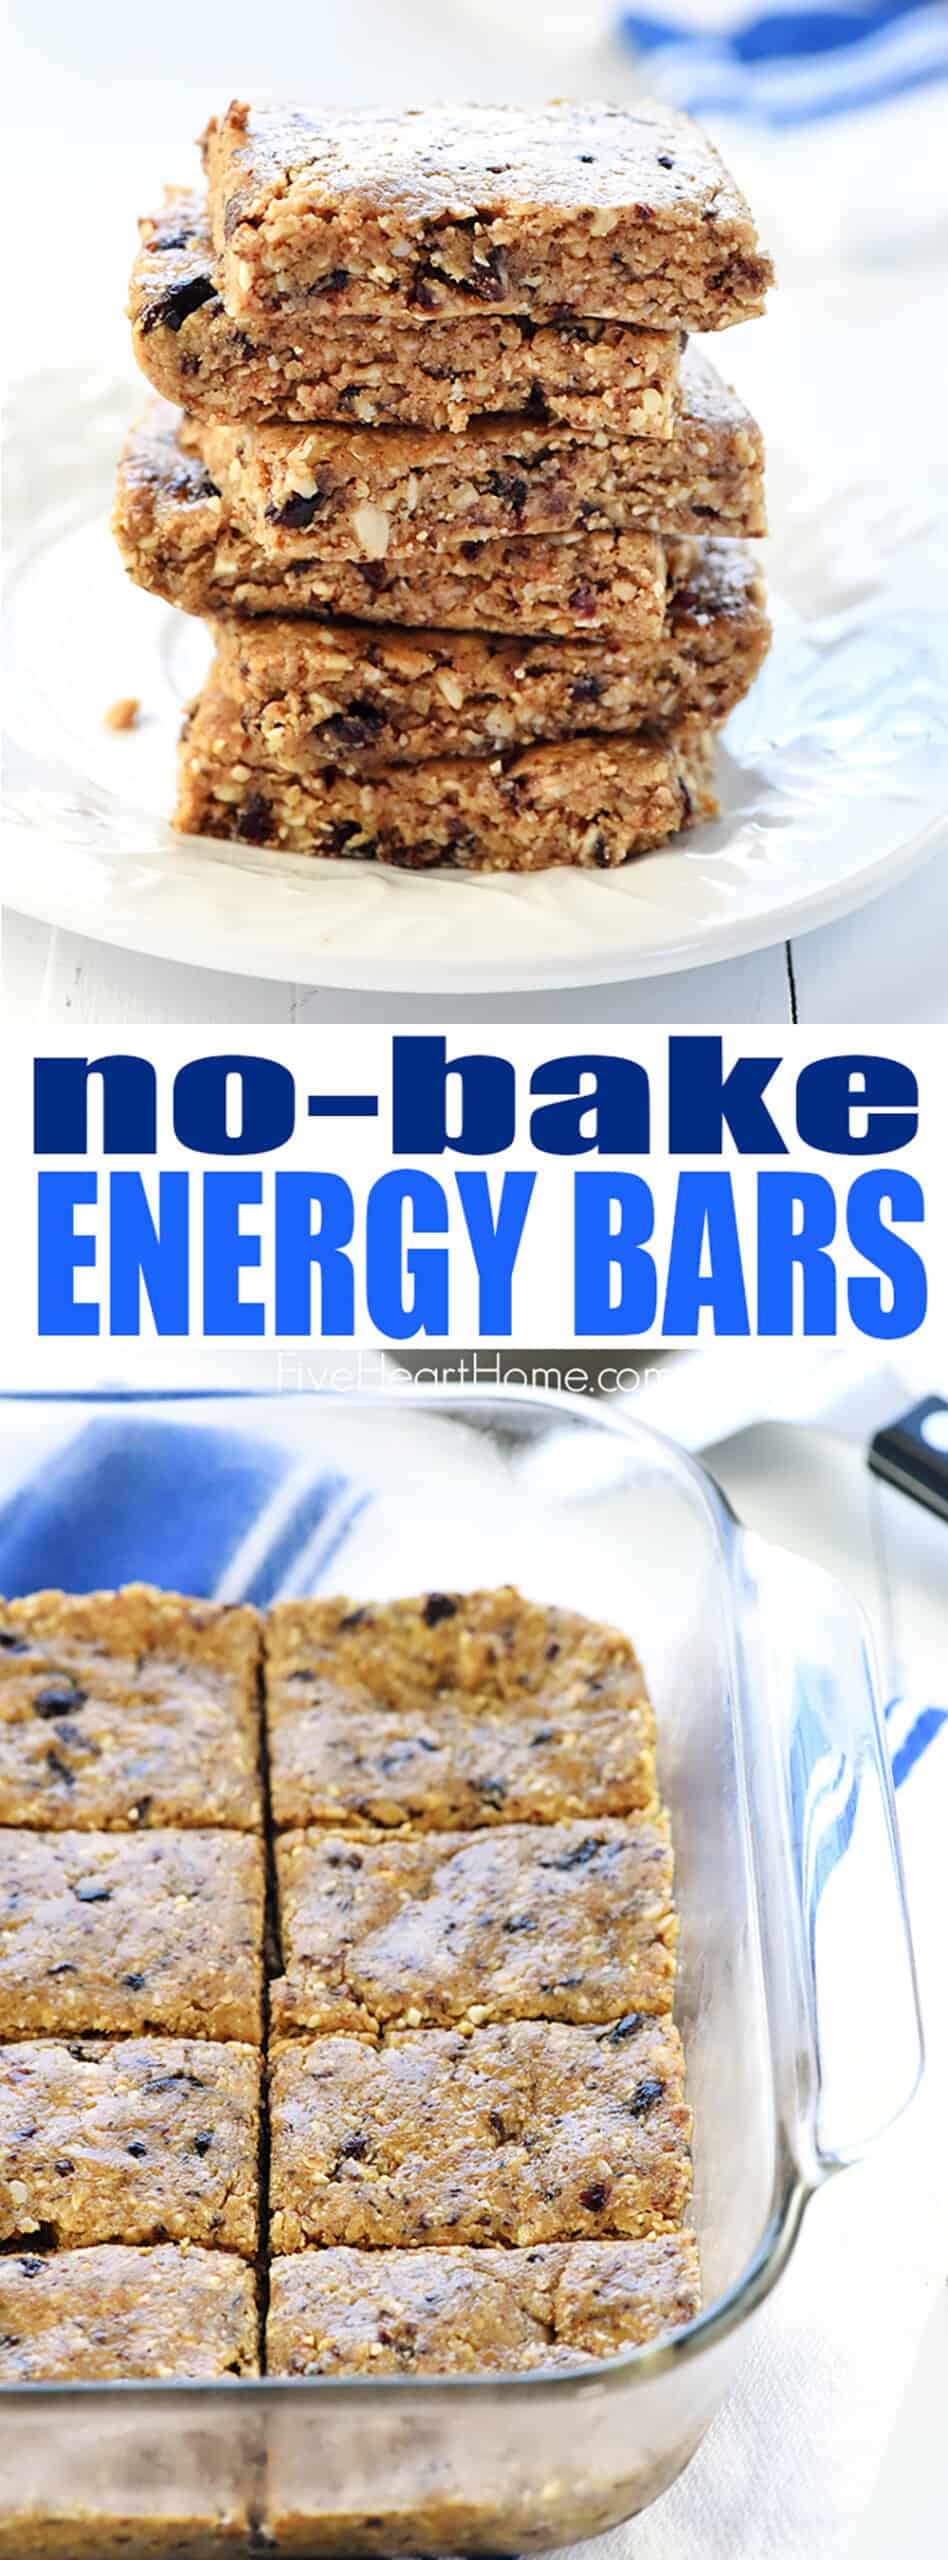 No-Bake Oatmeal Peanut Butter Energy Bars ~ these easy energy bars quickly come together in the food processor with wholesome ingredients like oats, nuts, chia seeds, peanut butter (or your favorite alternative), dried fruit, and honey! | FiveHeartHome.com via @fivehearthome